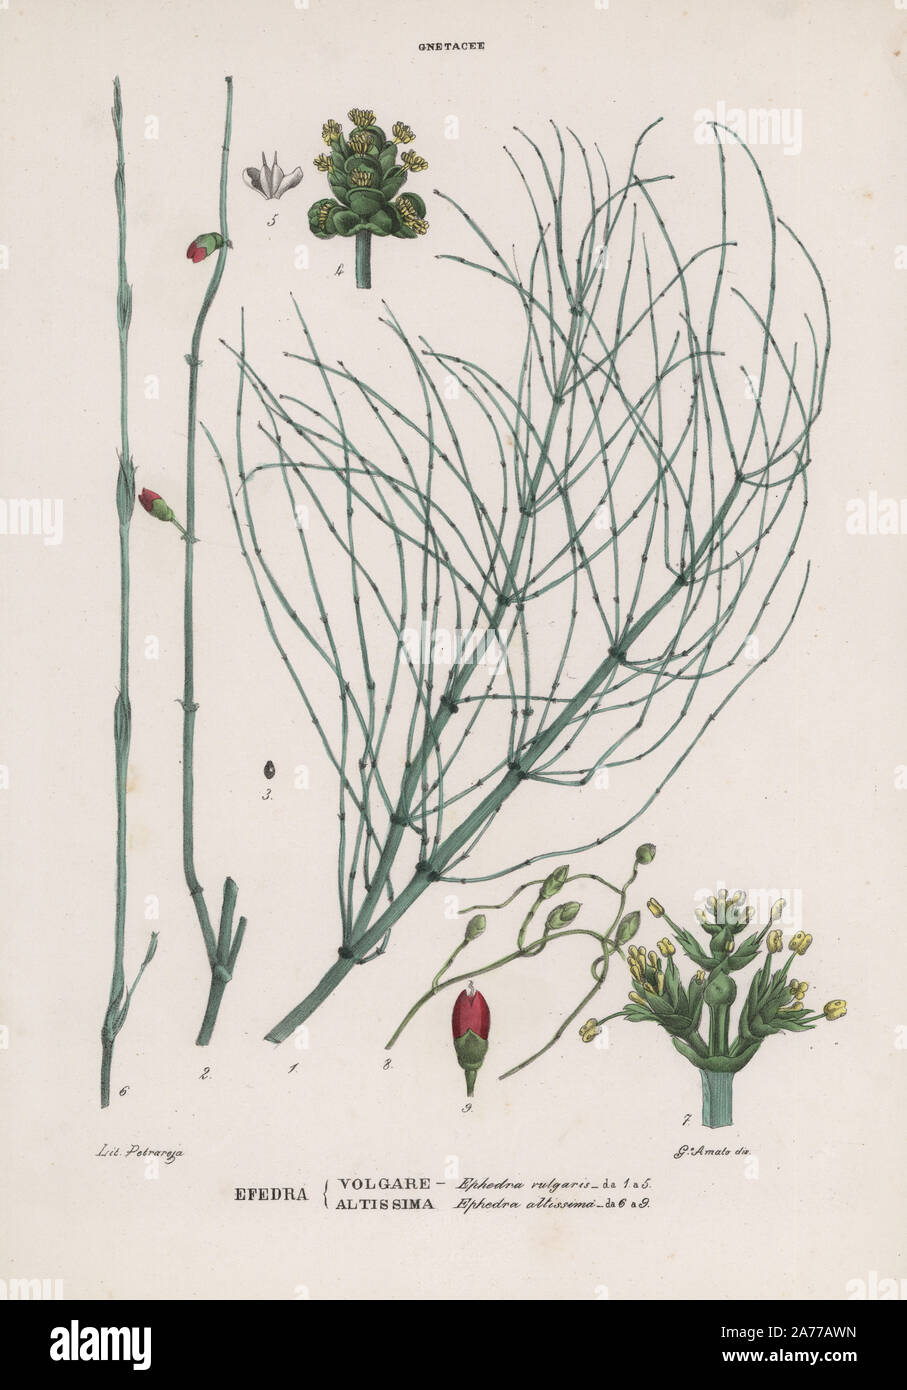 Efedra or mahuang, Ephedra distachya (Ephedra vulgaris) and Ephedra altissima. Herbal medicine ephedrine used in Chinese medicine and ayurveda. Handcoloured lithograph by Raimondo Petraroja after an illustration by Giorgio Amato from Tenore and Pasquale's “Atlante di Botanica Populaire,” Atlas of Popular Botany, 1870, Naples, Italy. Stock Photo